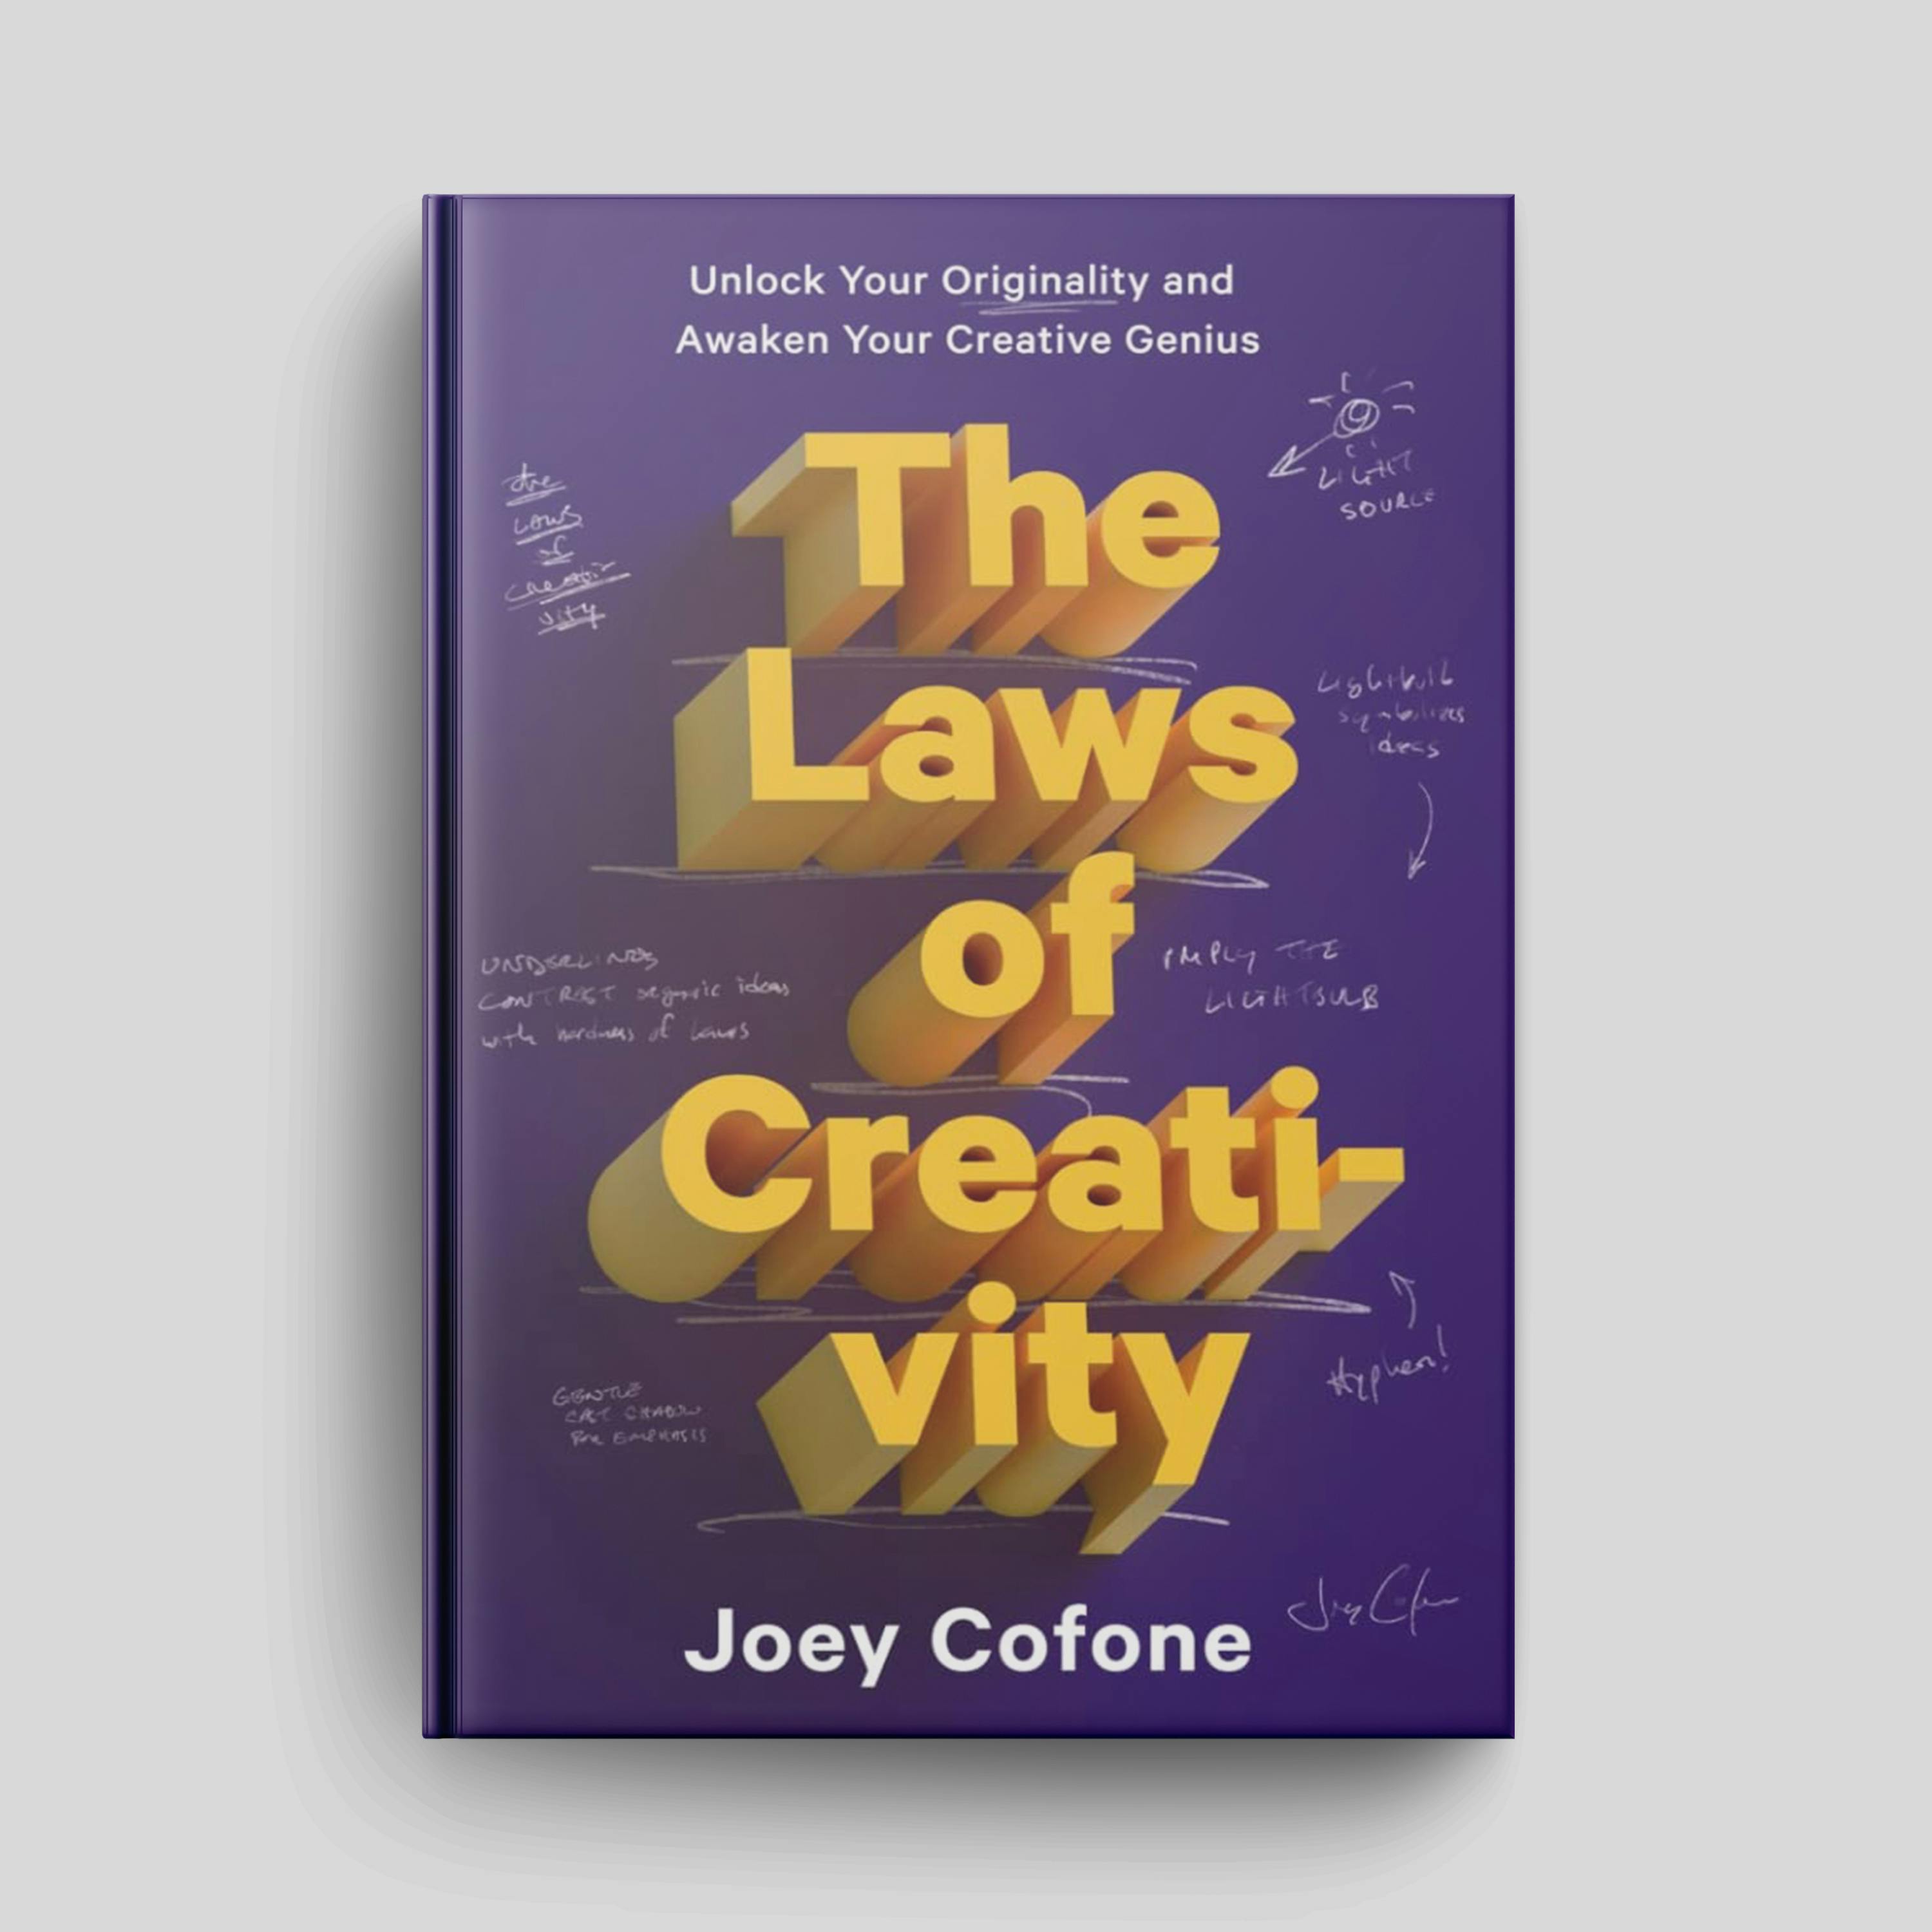 Trailer - Book: ”The Laws of Creativity: How to Unlock Your Originality and Awaken Your Creative Genius” | Episode #142